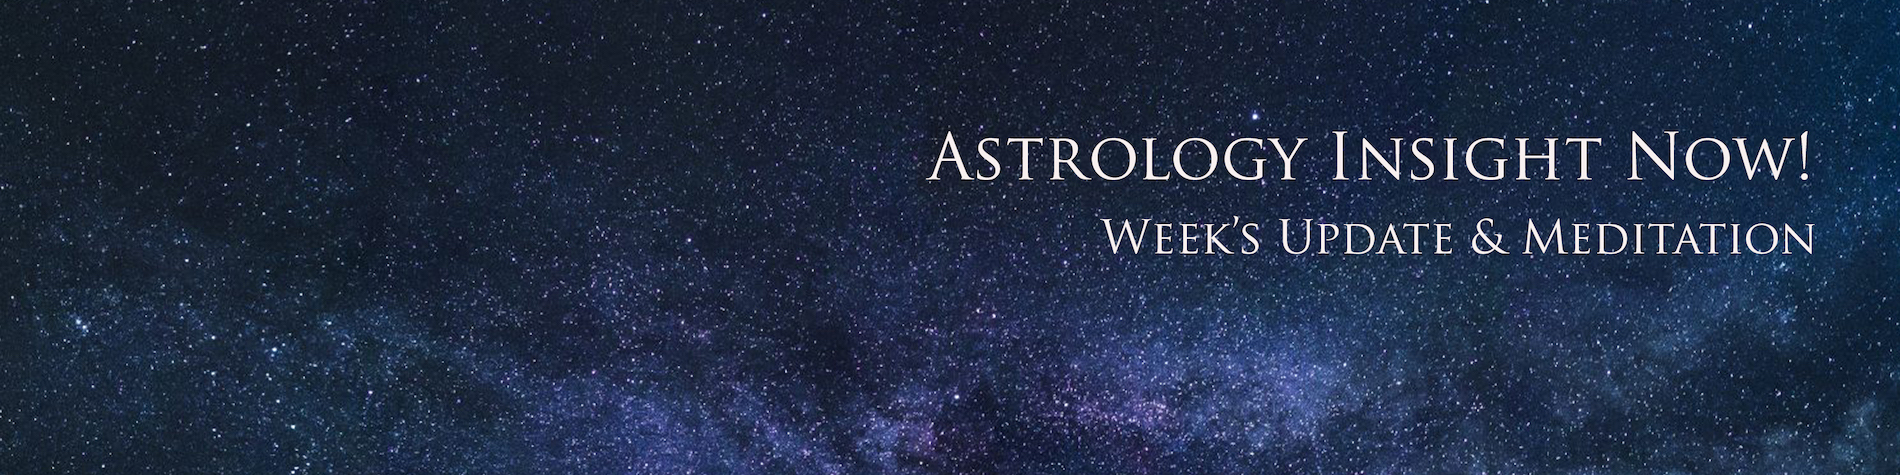 Astrology, Insight Now